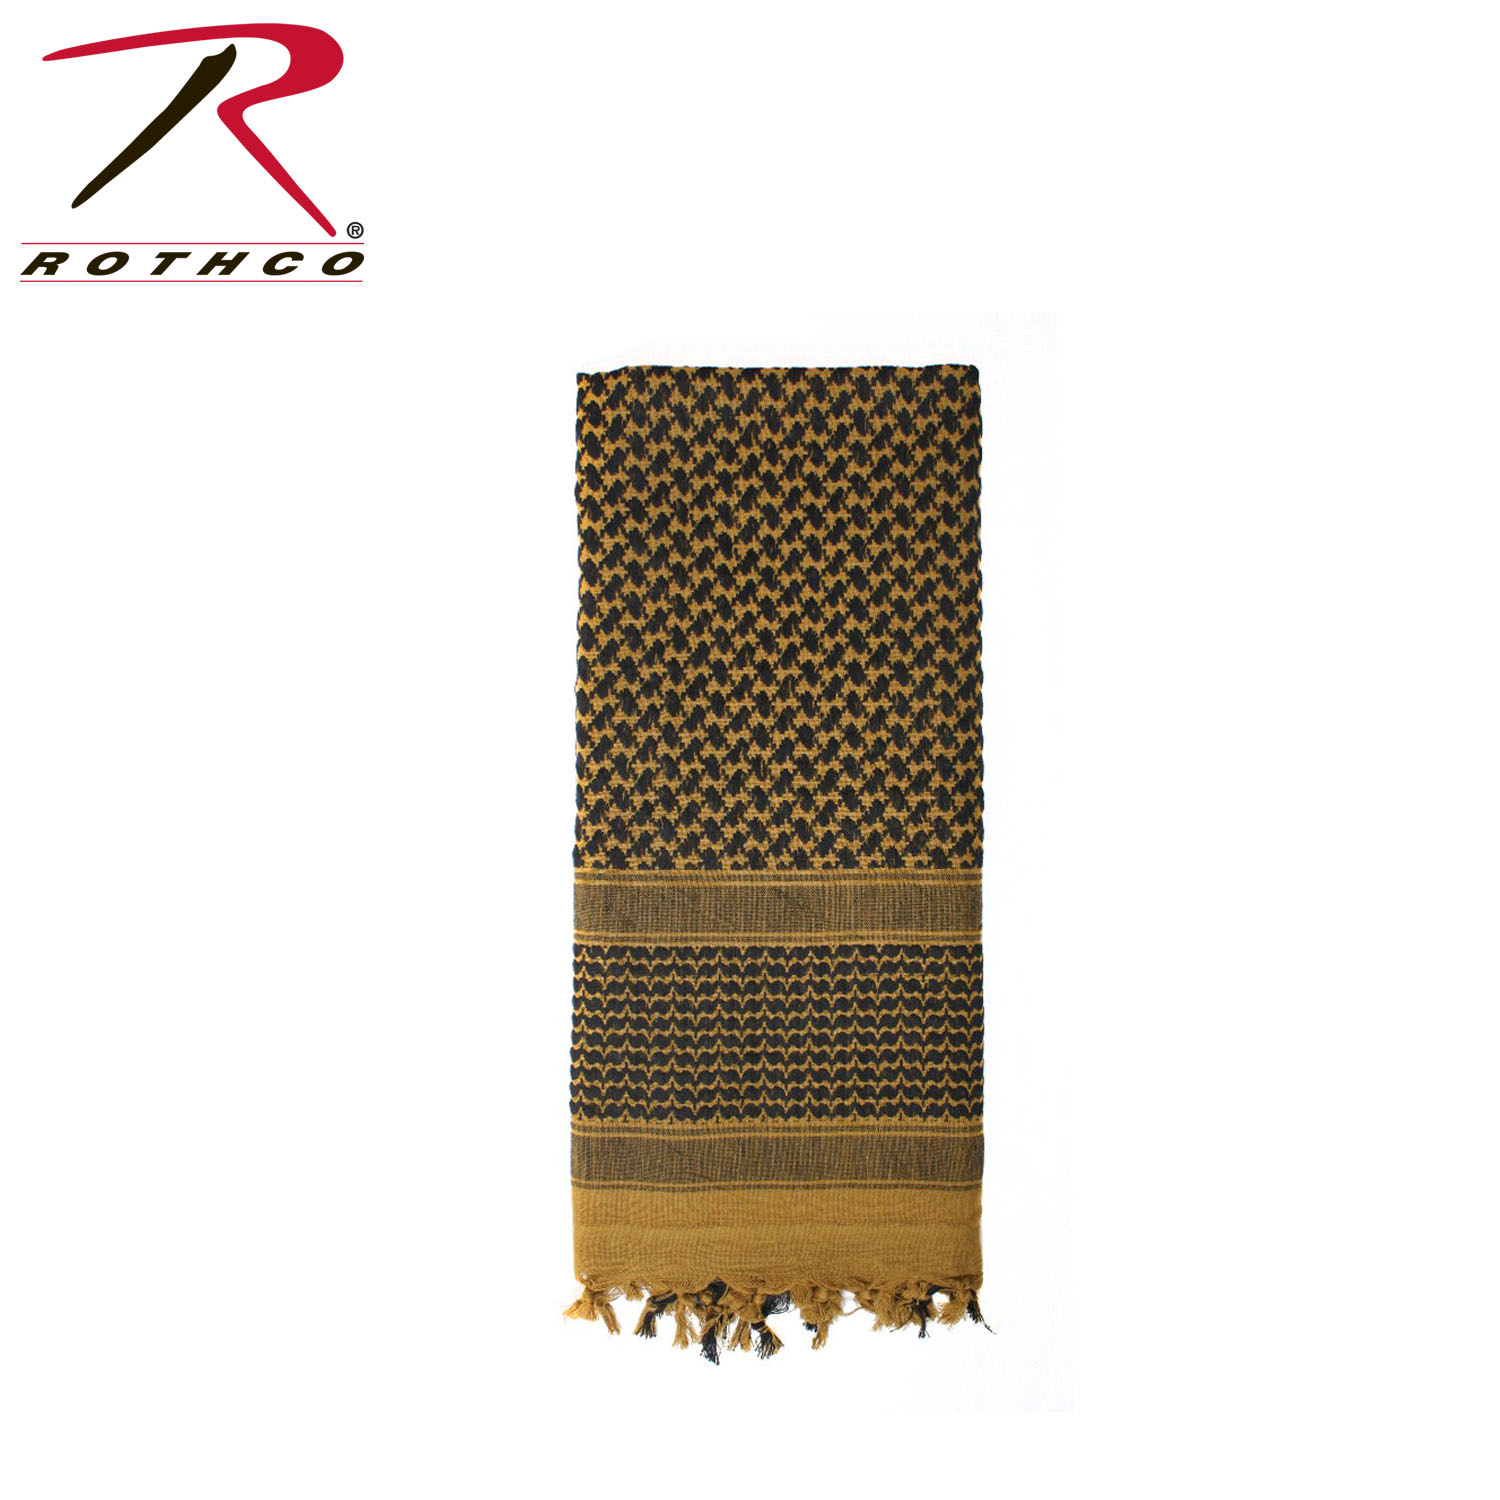 ECHARPE SHEMAGH DELUXE - ROTHCO - COYOTE BROWN